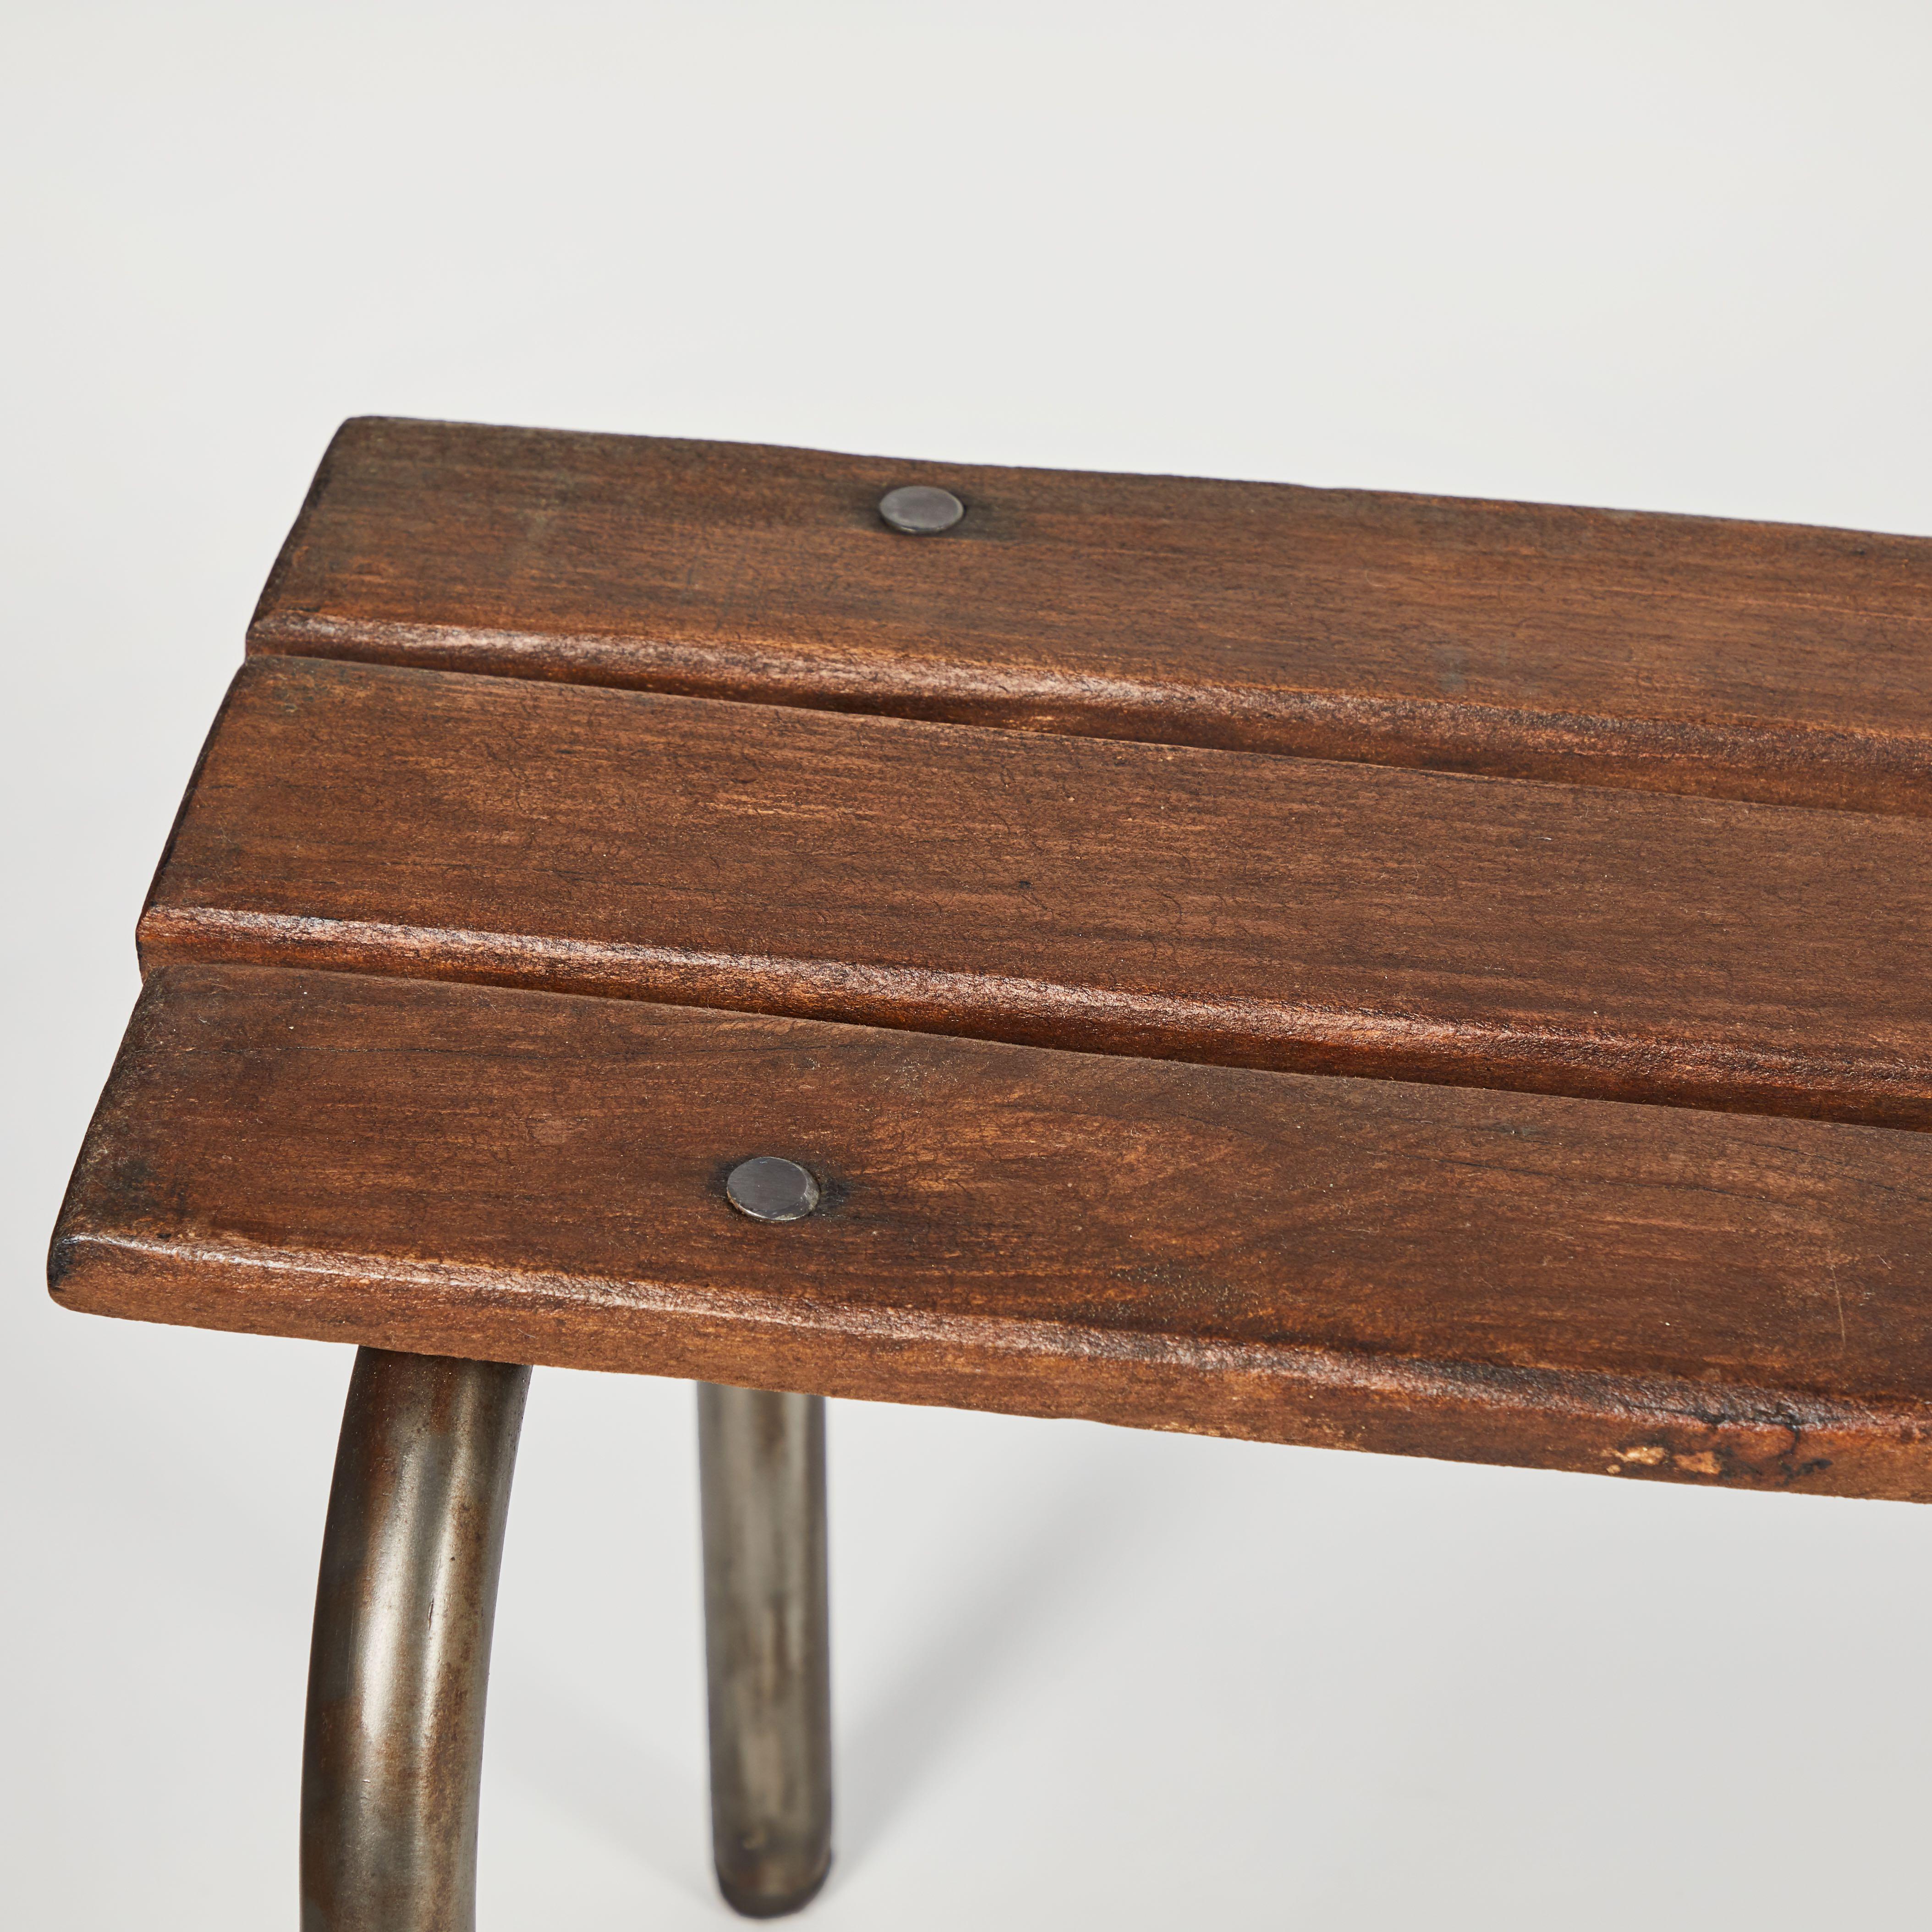 Rustic Early 20th Century Metal and Wood Bench from France